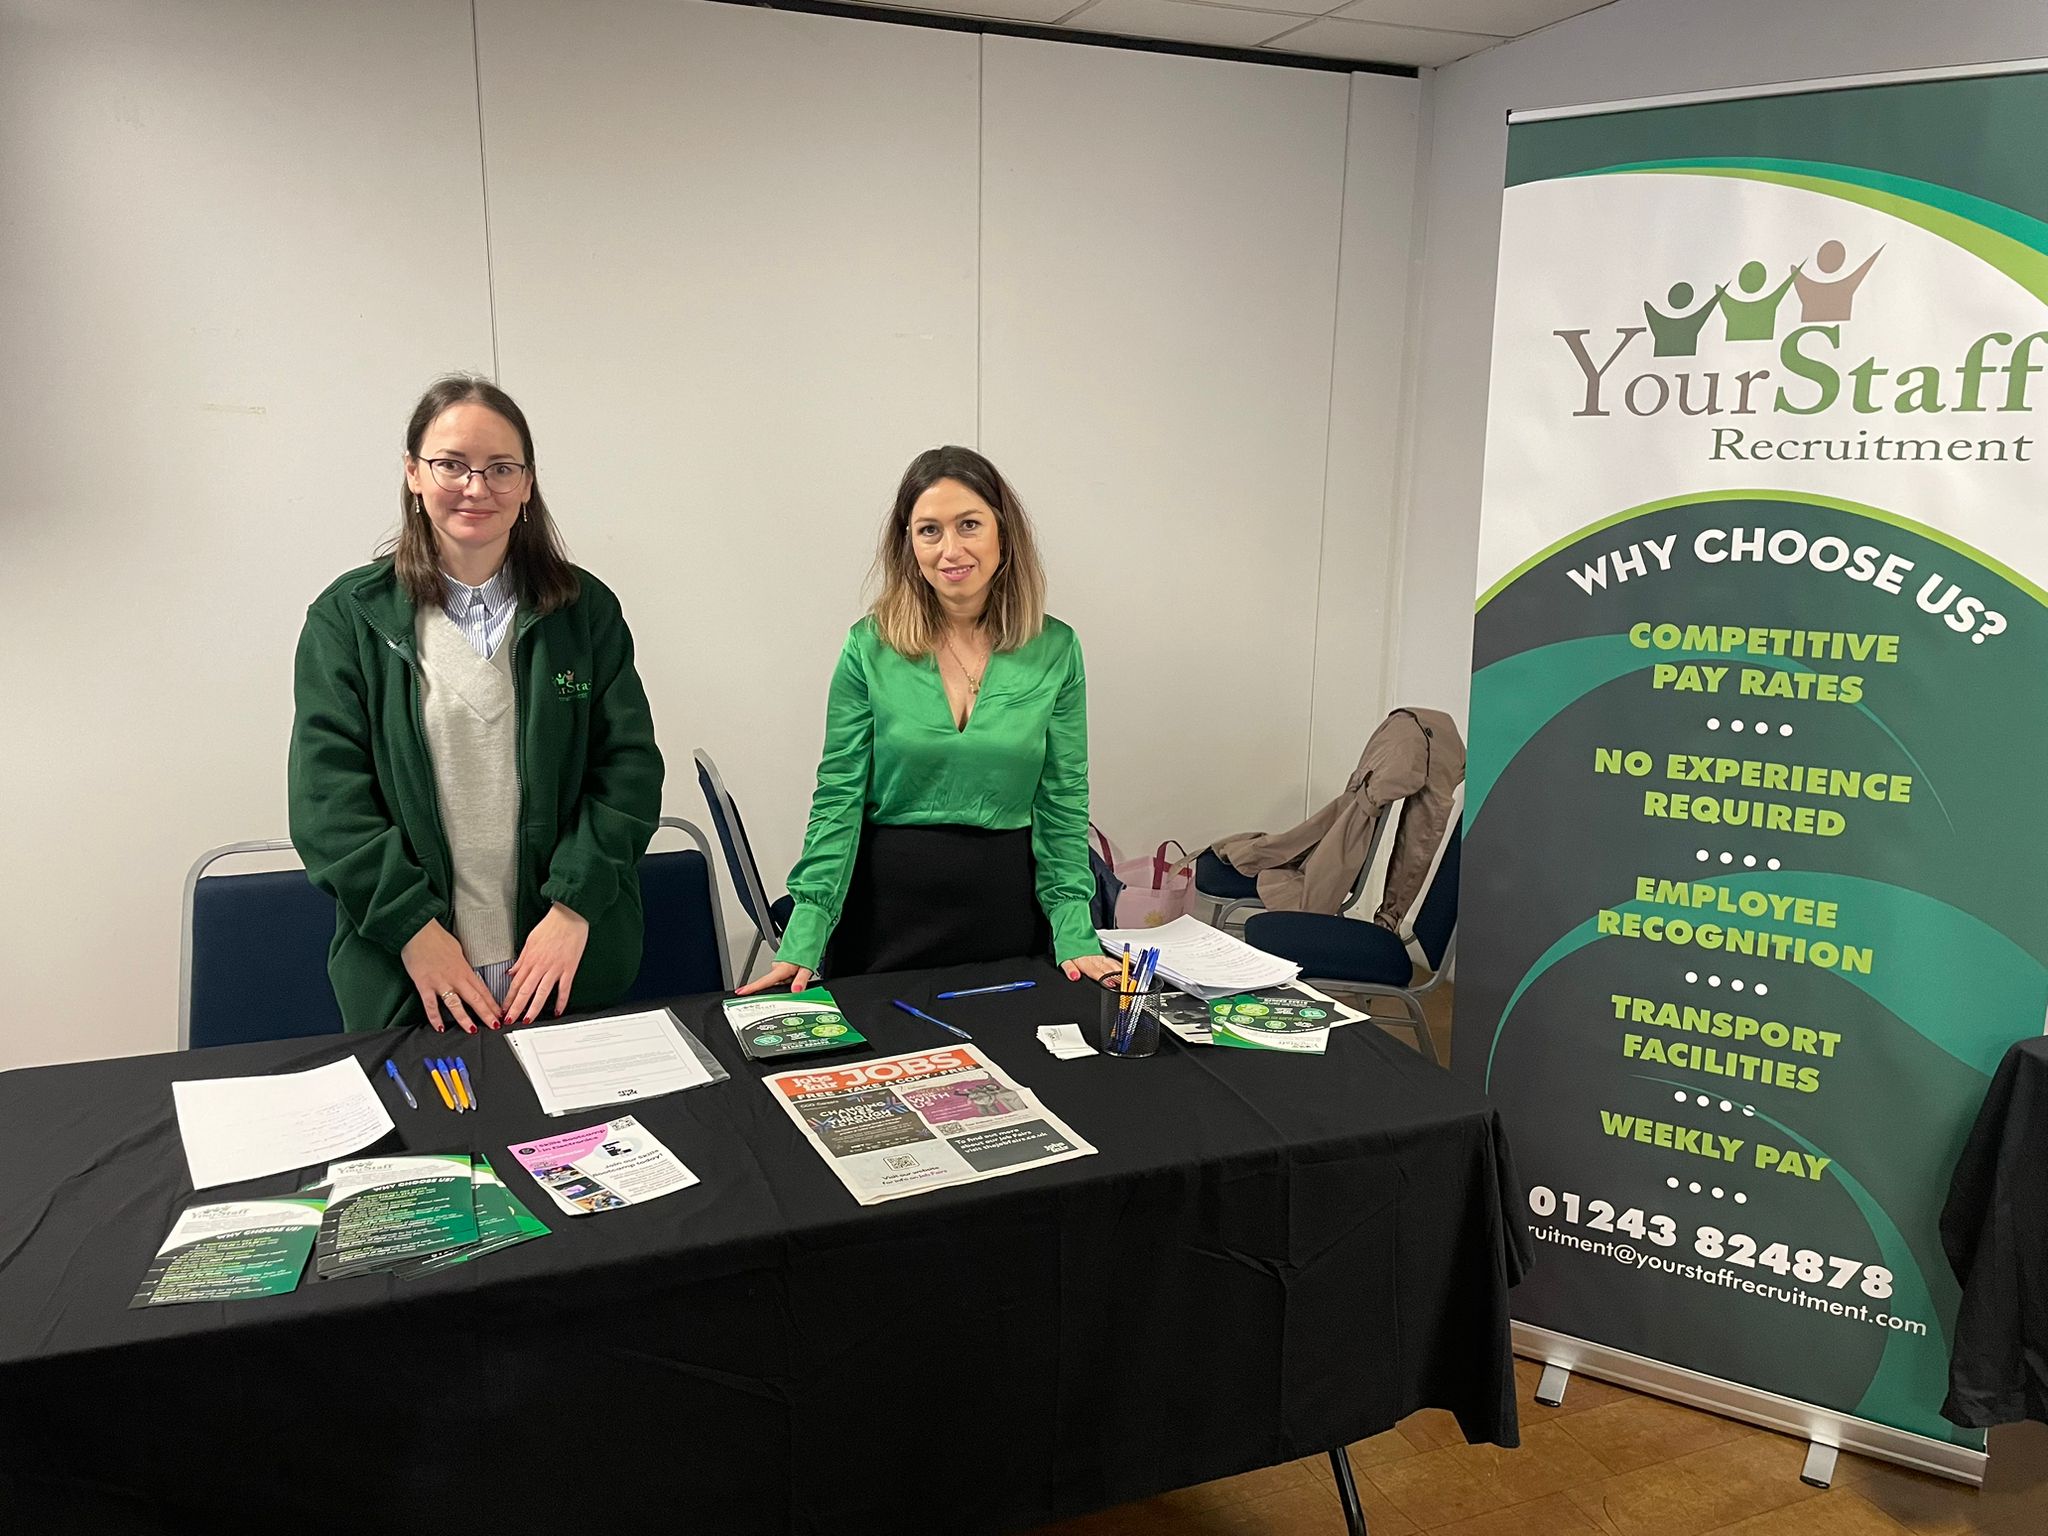 YourStaff Recruitment at our event in Portsmouth